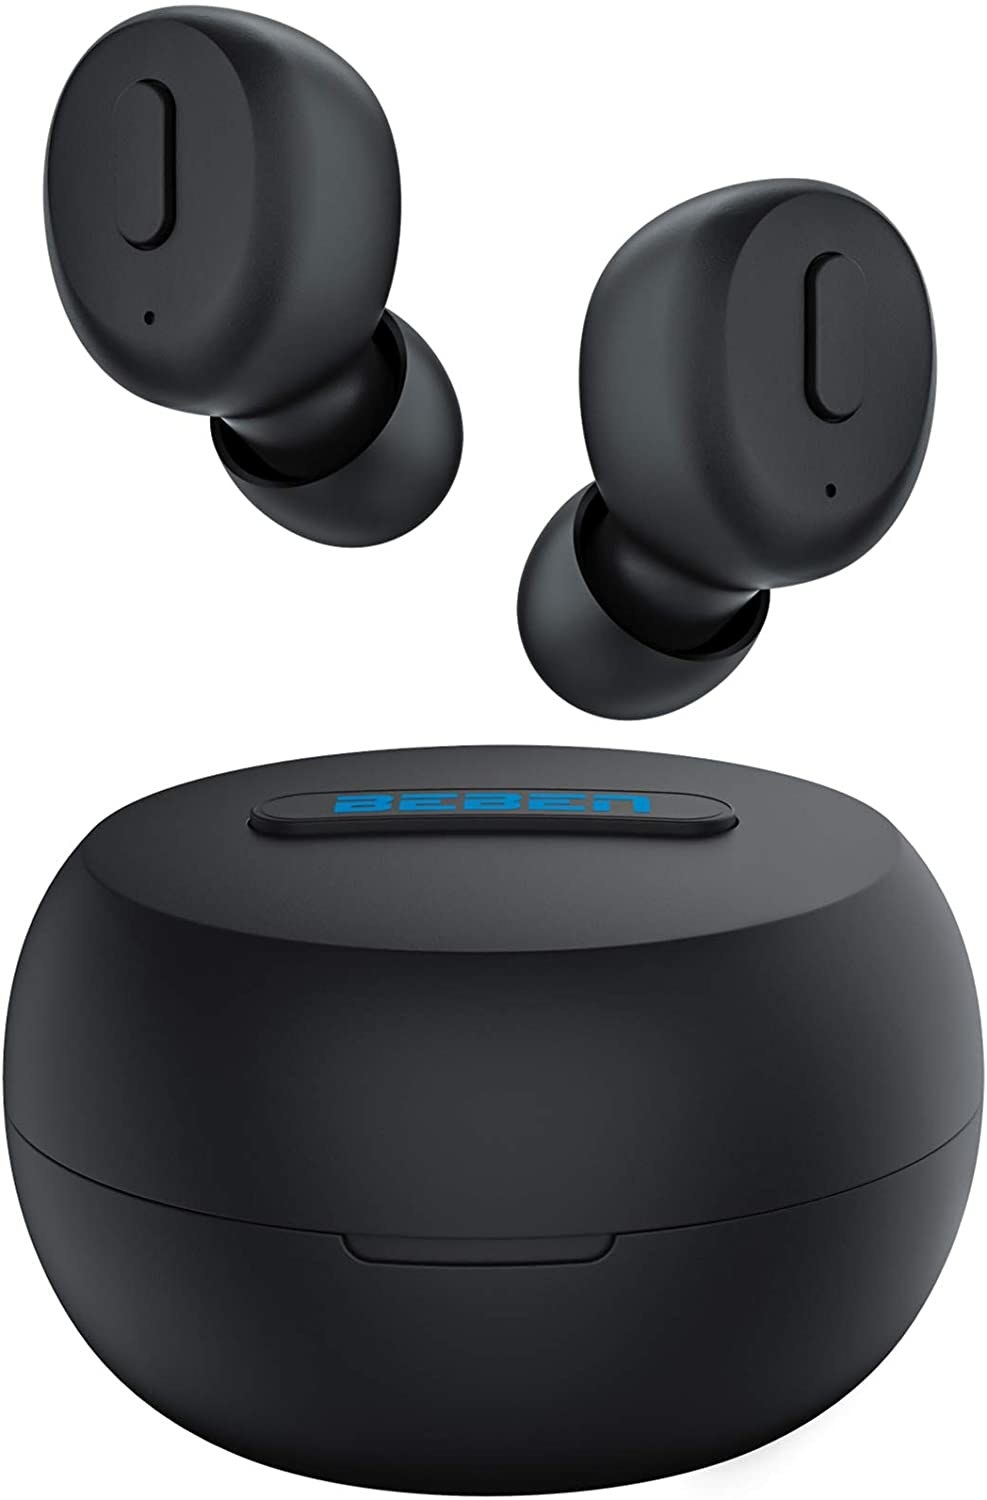 The wireless earbuds and charging case in black